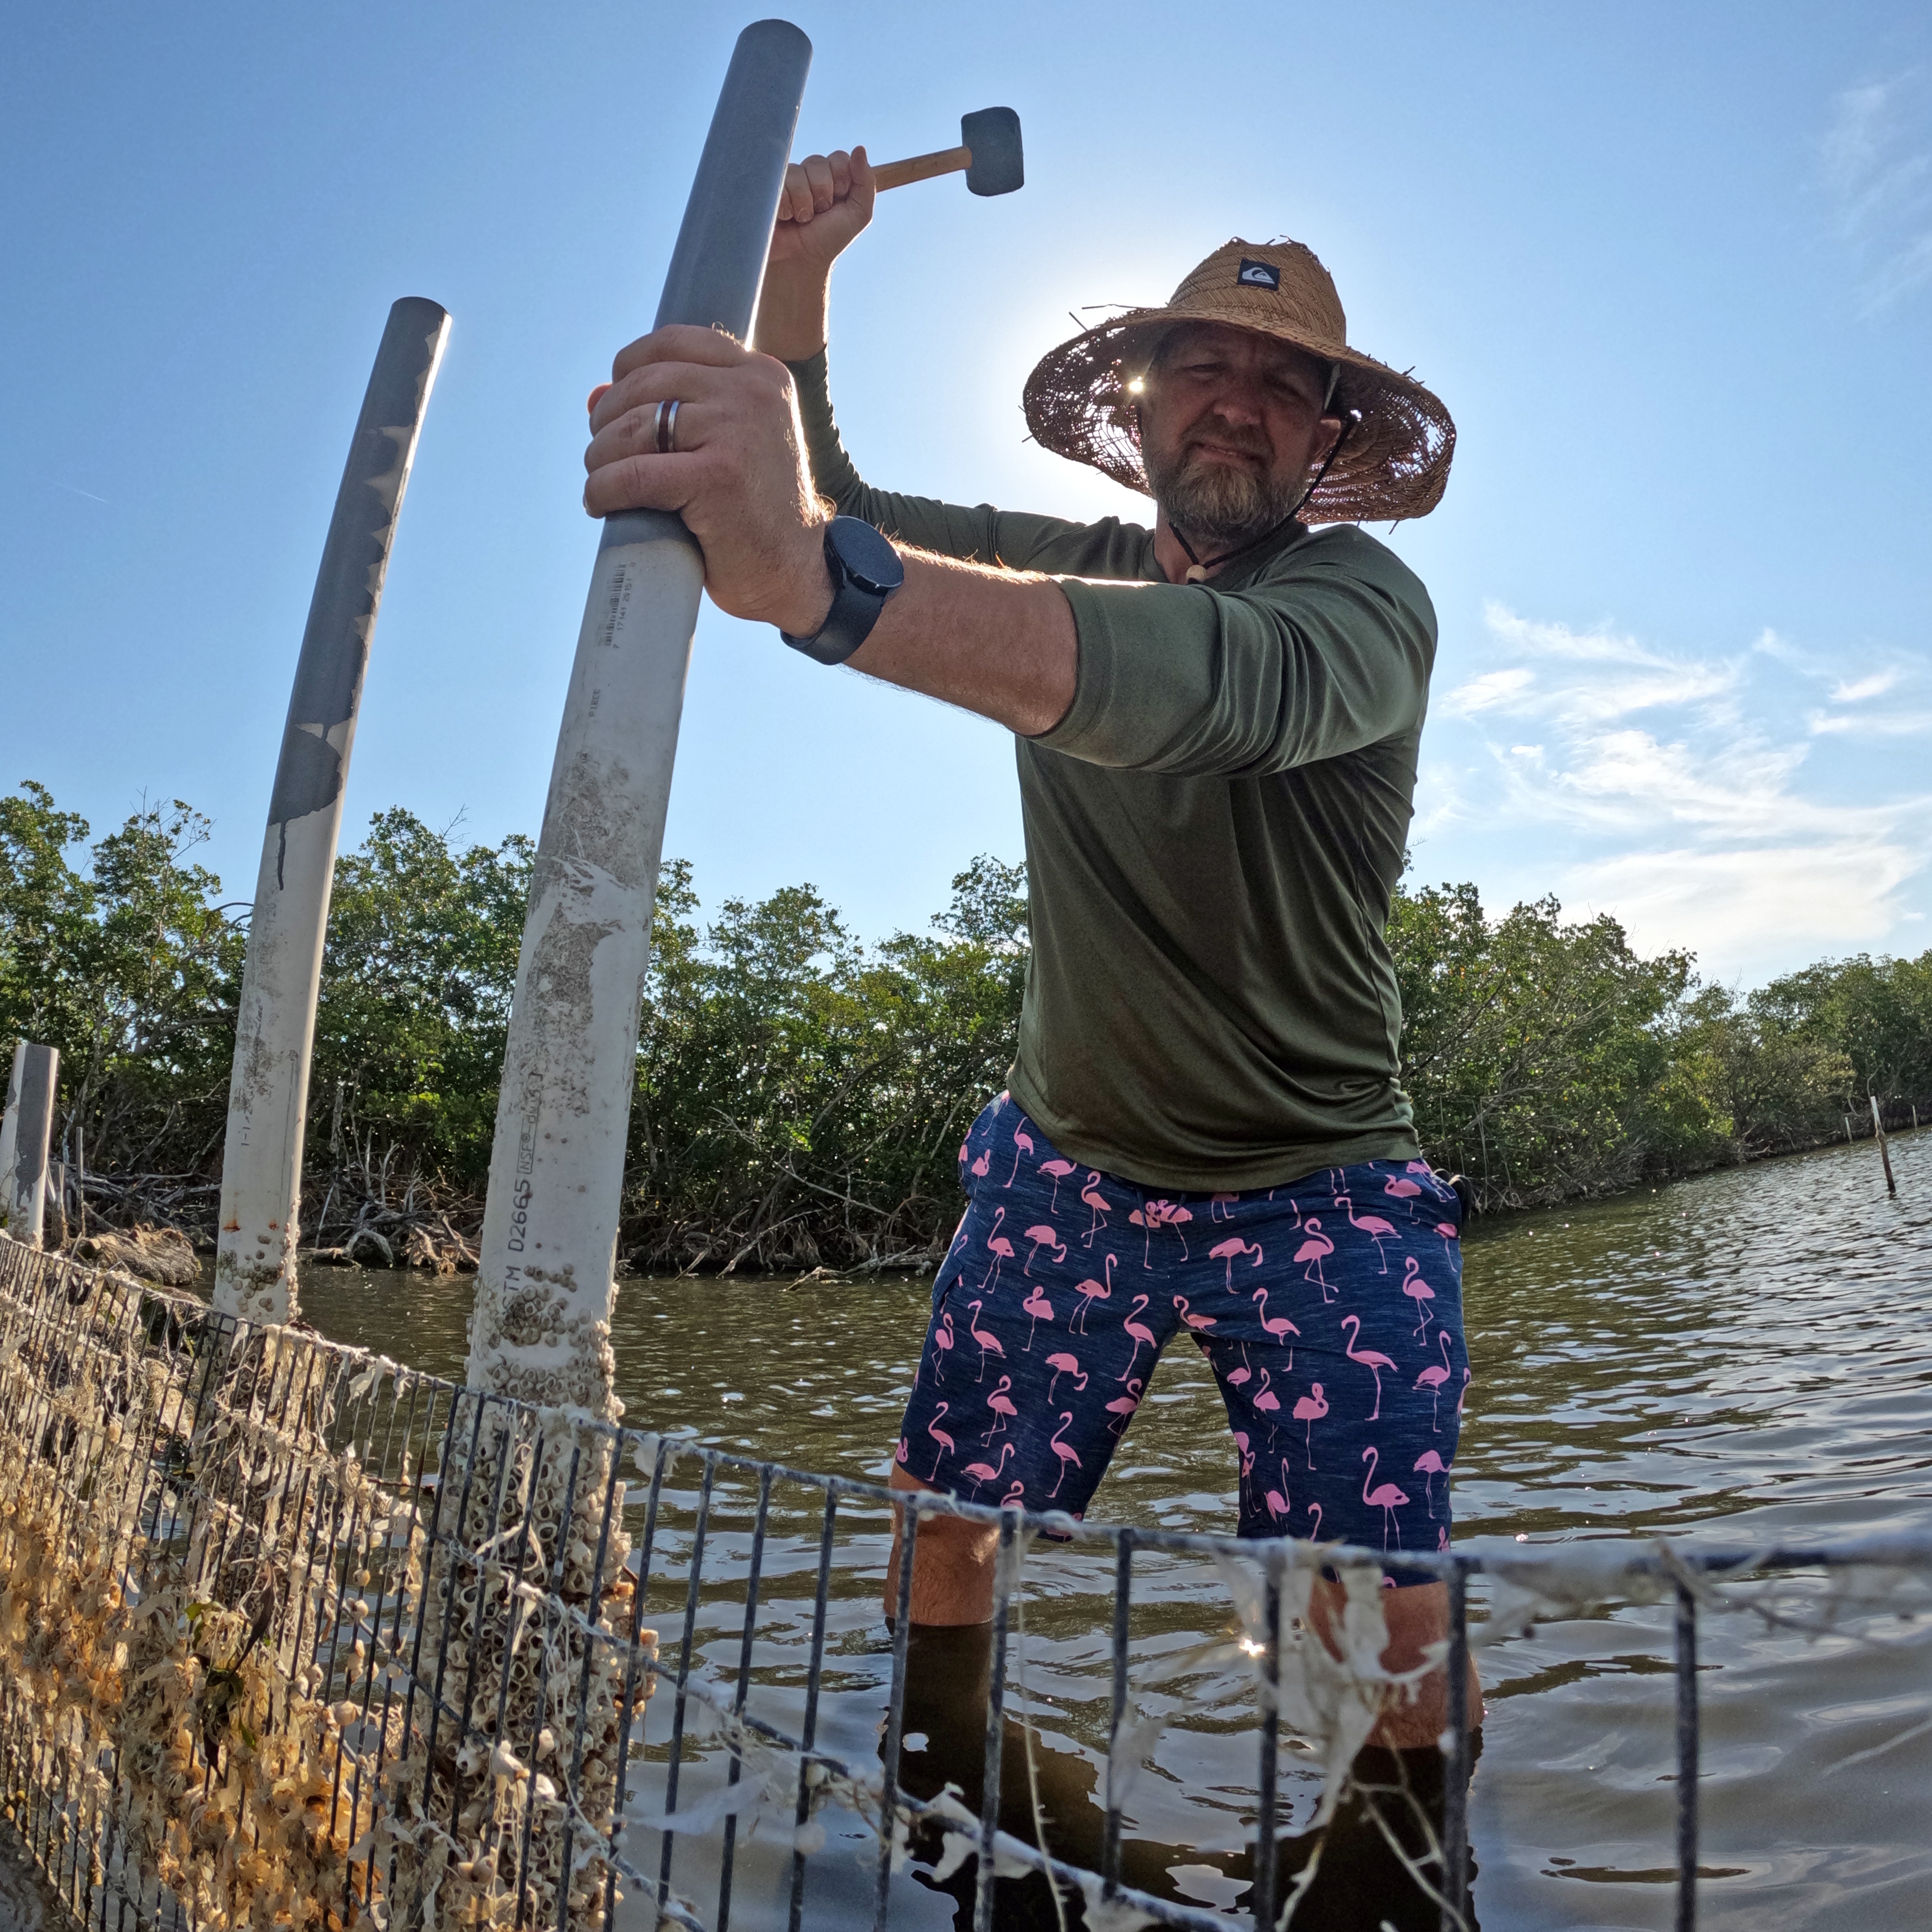 Samson's Island Submerged Lands Restoration Project in Satellite Beach, Florida. Josh putting a fence in place to keep megafauna out of the wet nursery. This prevents grazing on the establishing shoal grass (Halodule wrightii). The perimeter consists of an oyster reef to act as a breakwater and sill, primarily for habitat recruitment and nursery protection. Photo: Josh Mills.